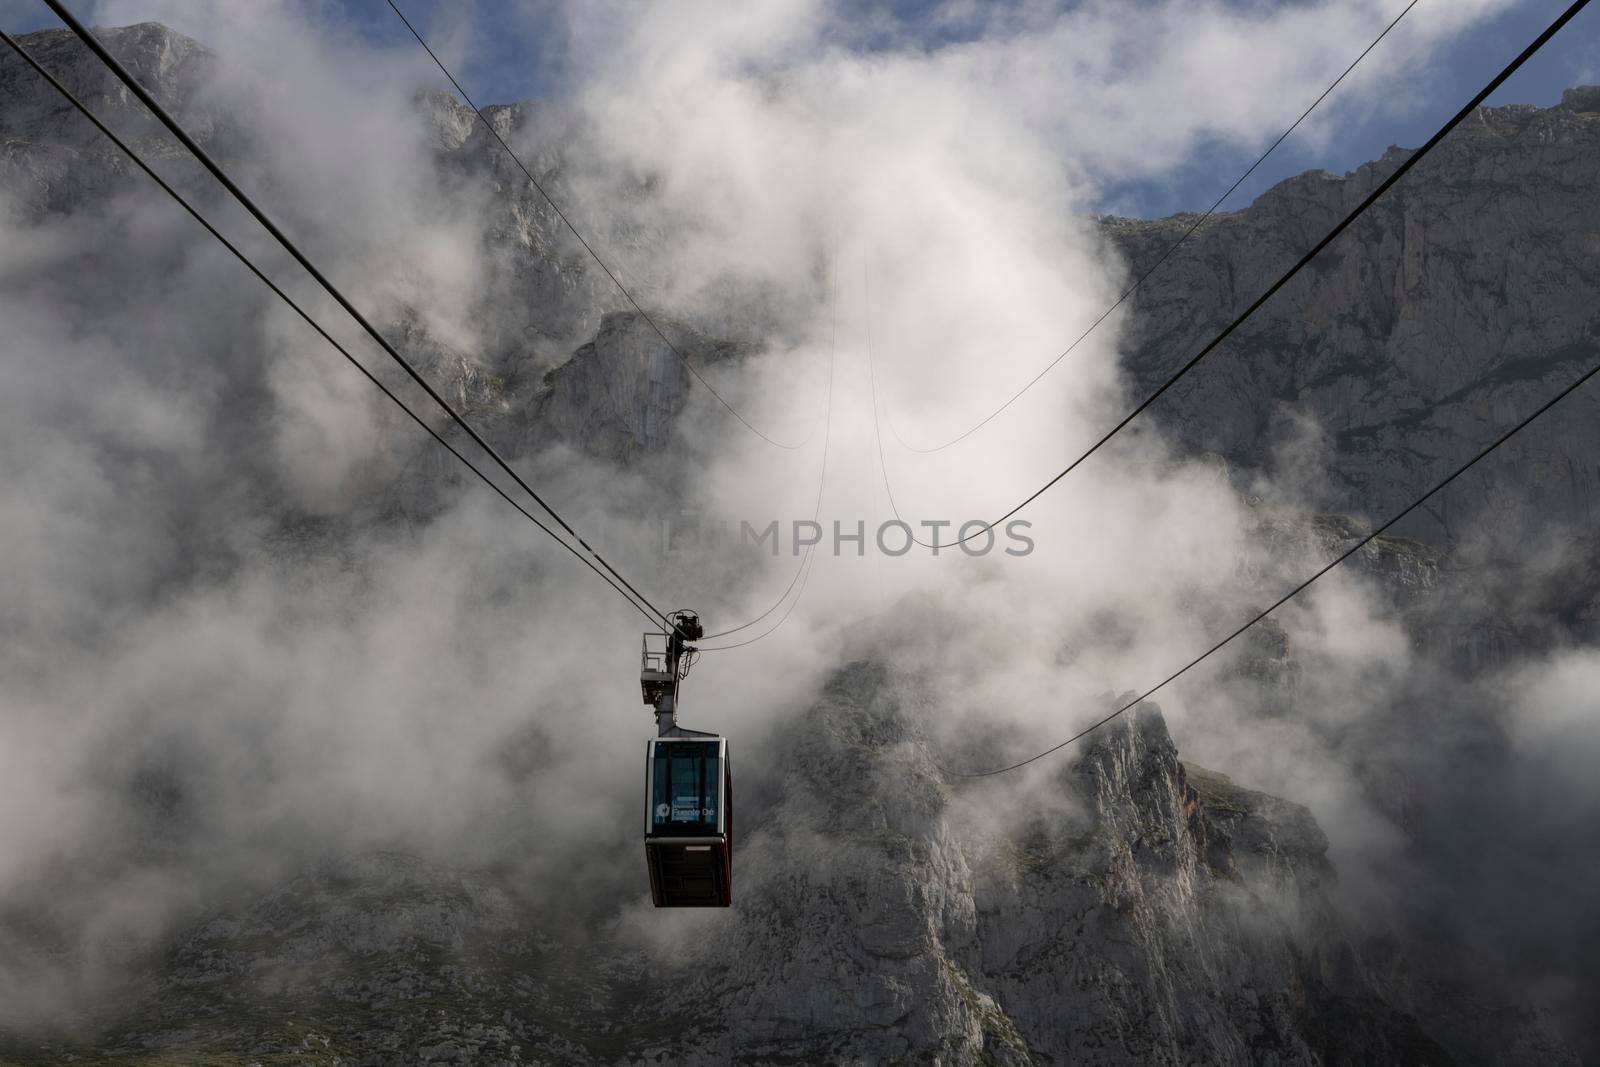 Foggy landscape showing a cable car and a rocky mountain in Fuente De in Picos de Europa in Spain